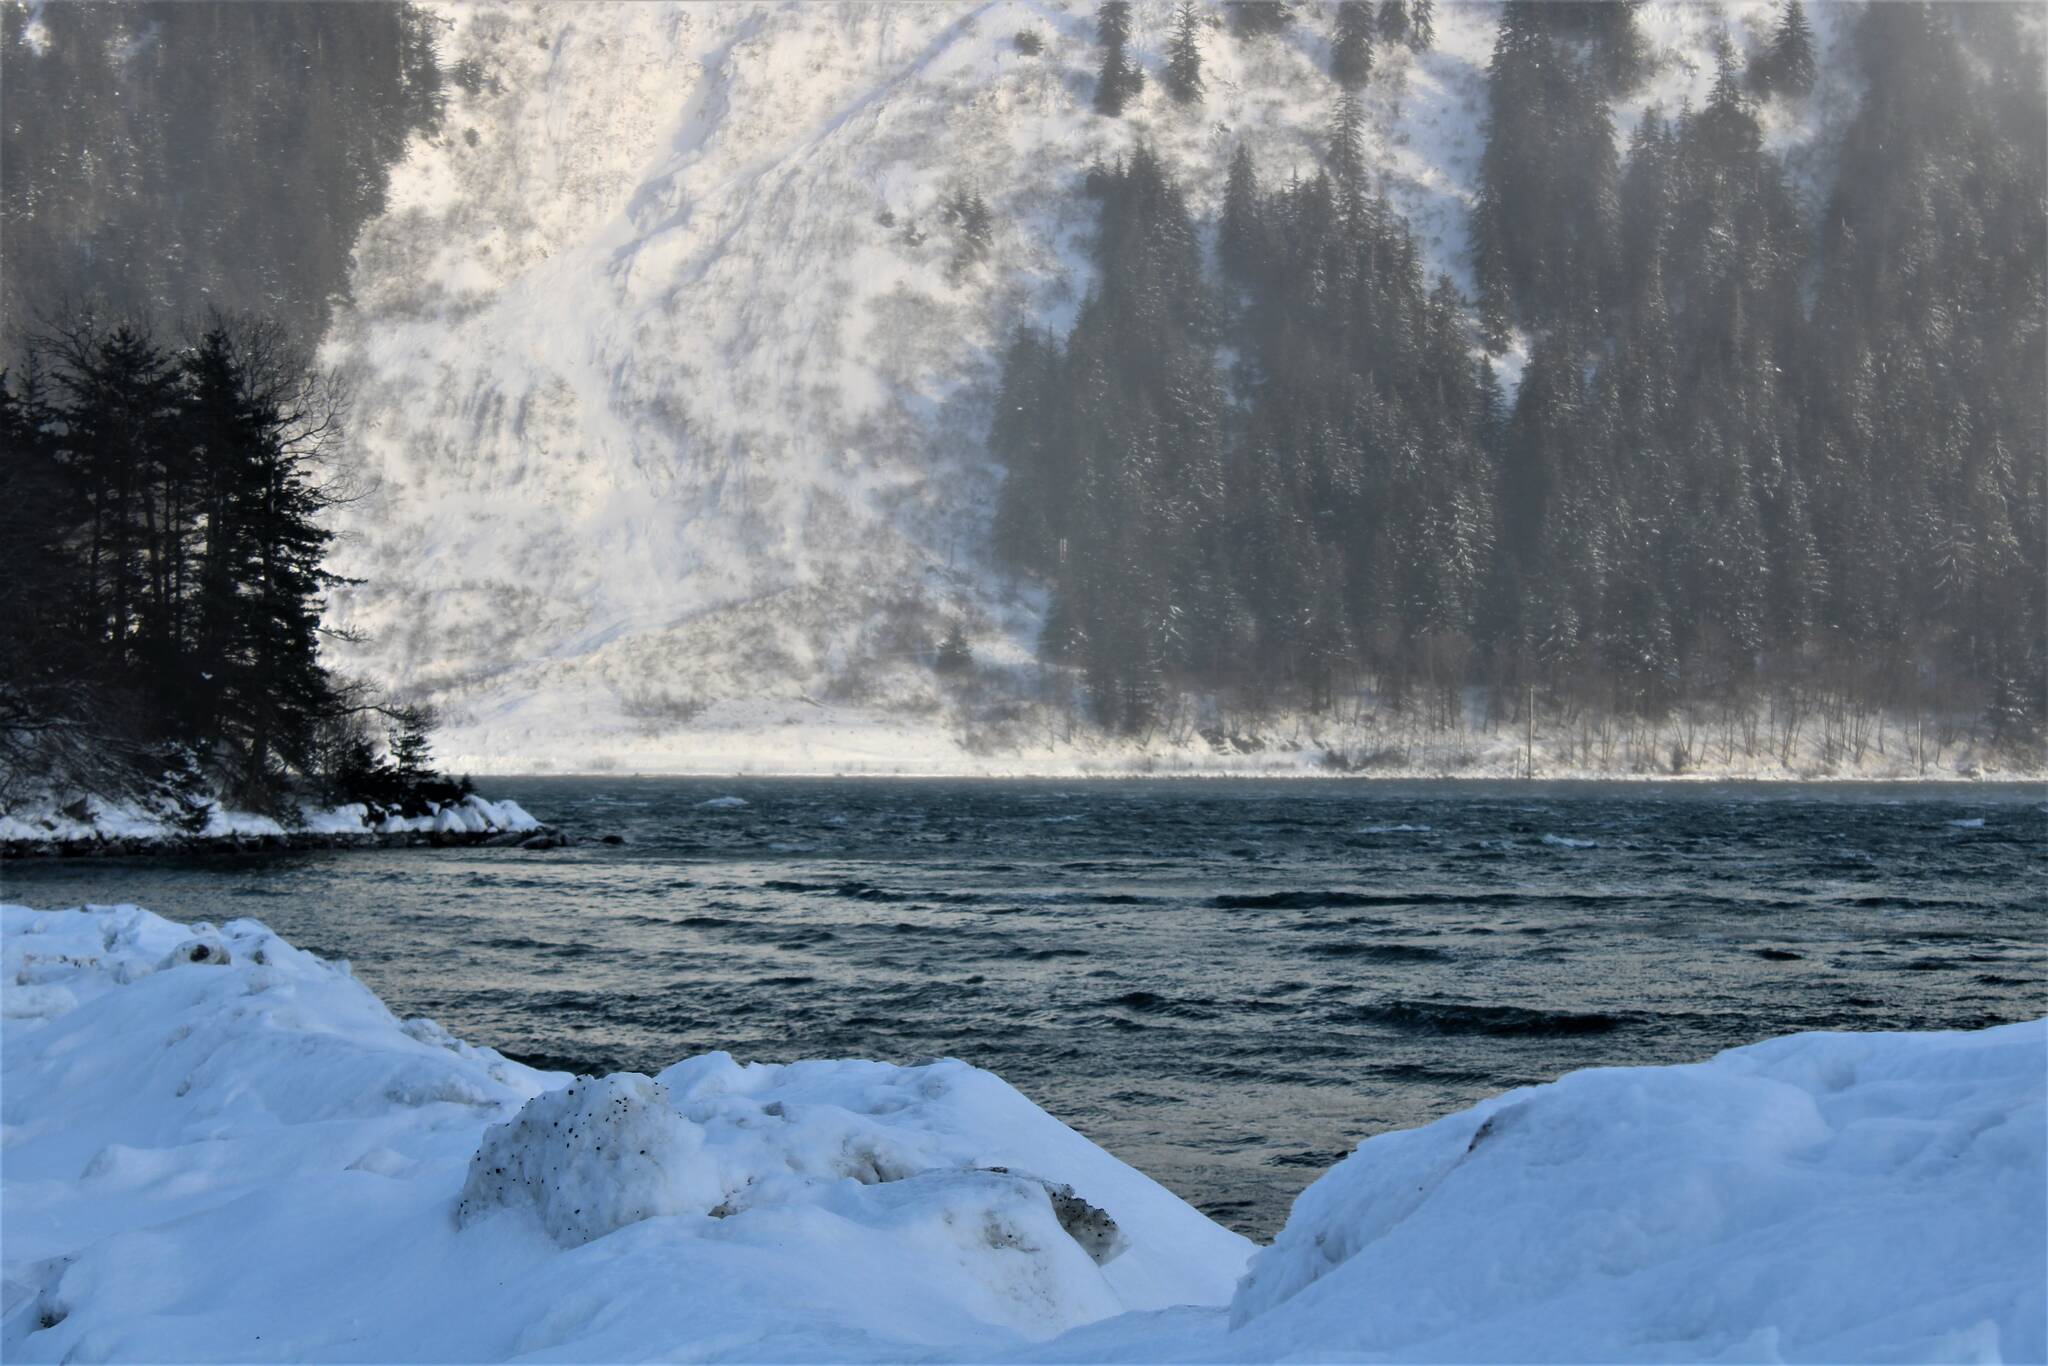 Waves pummel Sandy Beach on Douglas on Jan. 3. Avalanche debris from a weekend slide on Thane Road is visible across the Gastineau Channel. The avalanche delayed crews in responding to a power outage further down Thane Road. (Dana Zigmund / Juneau Empire)